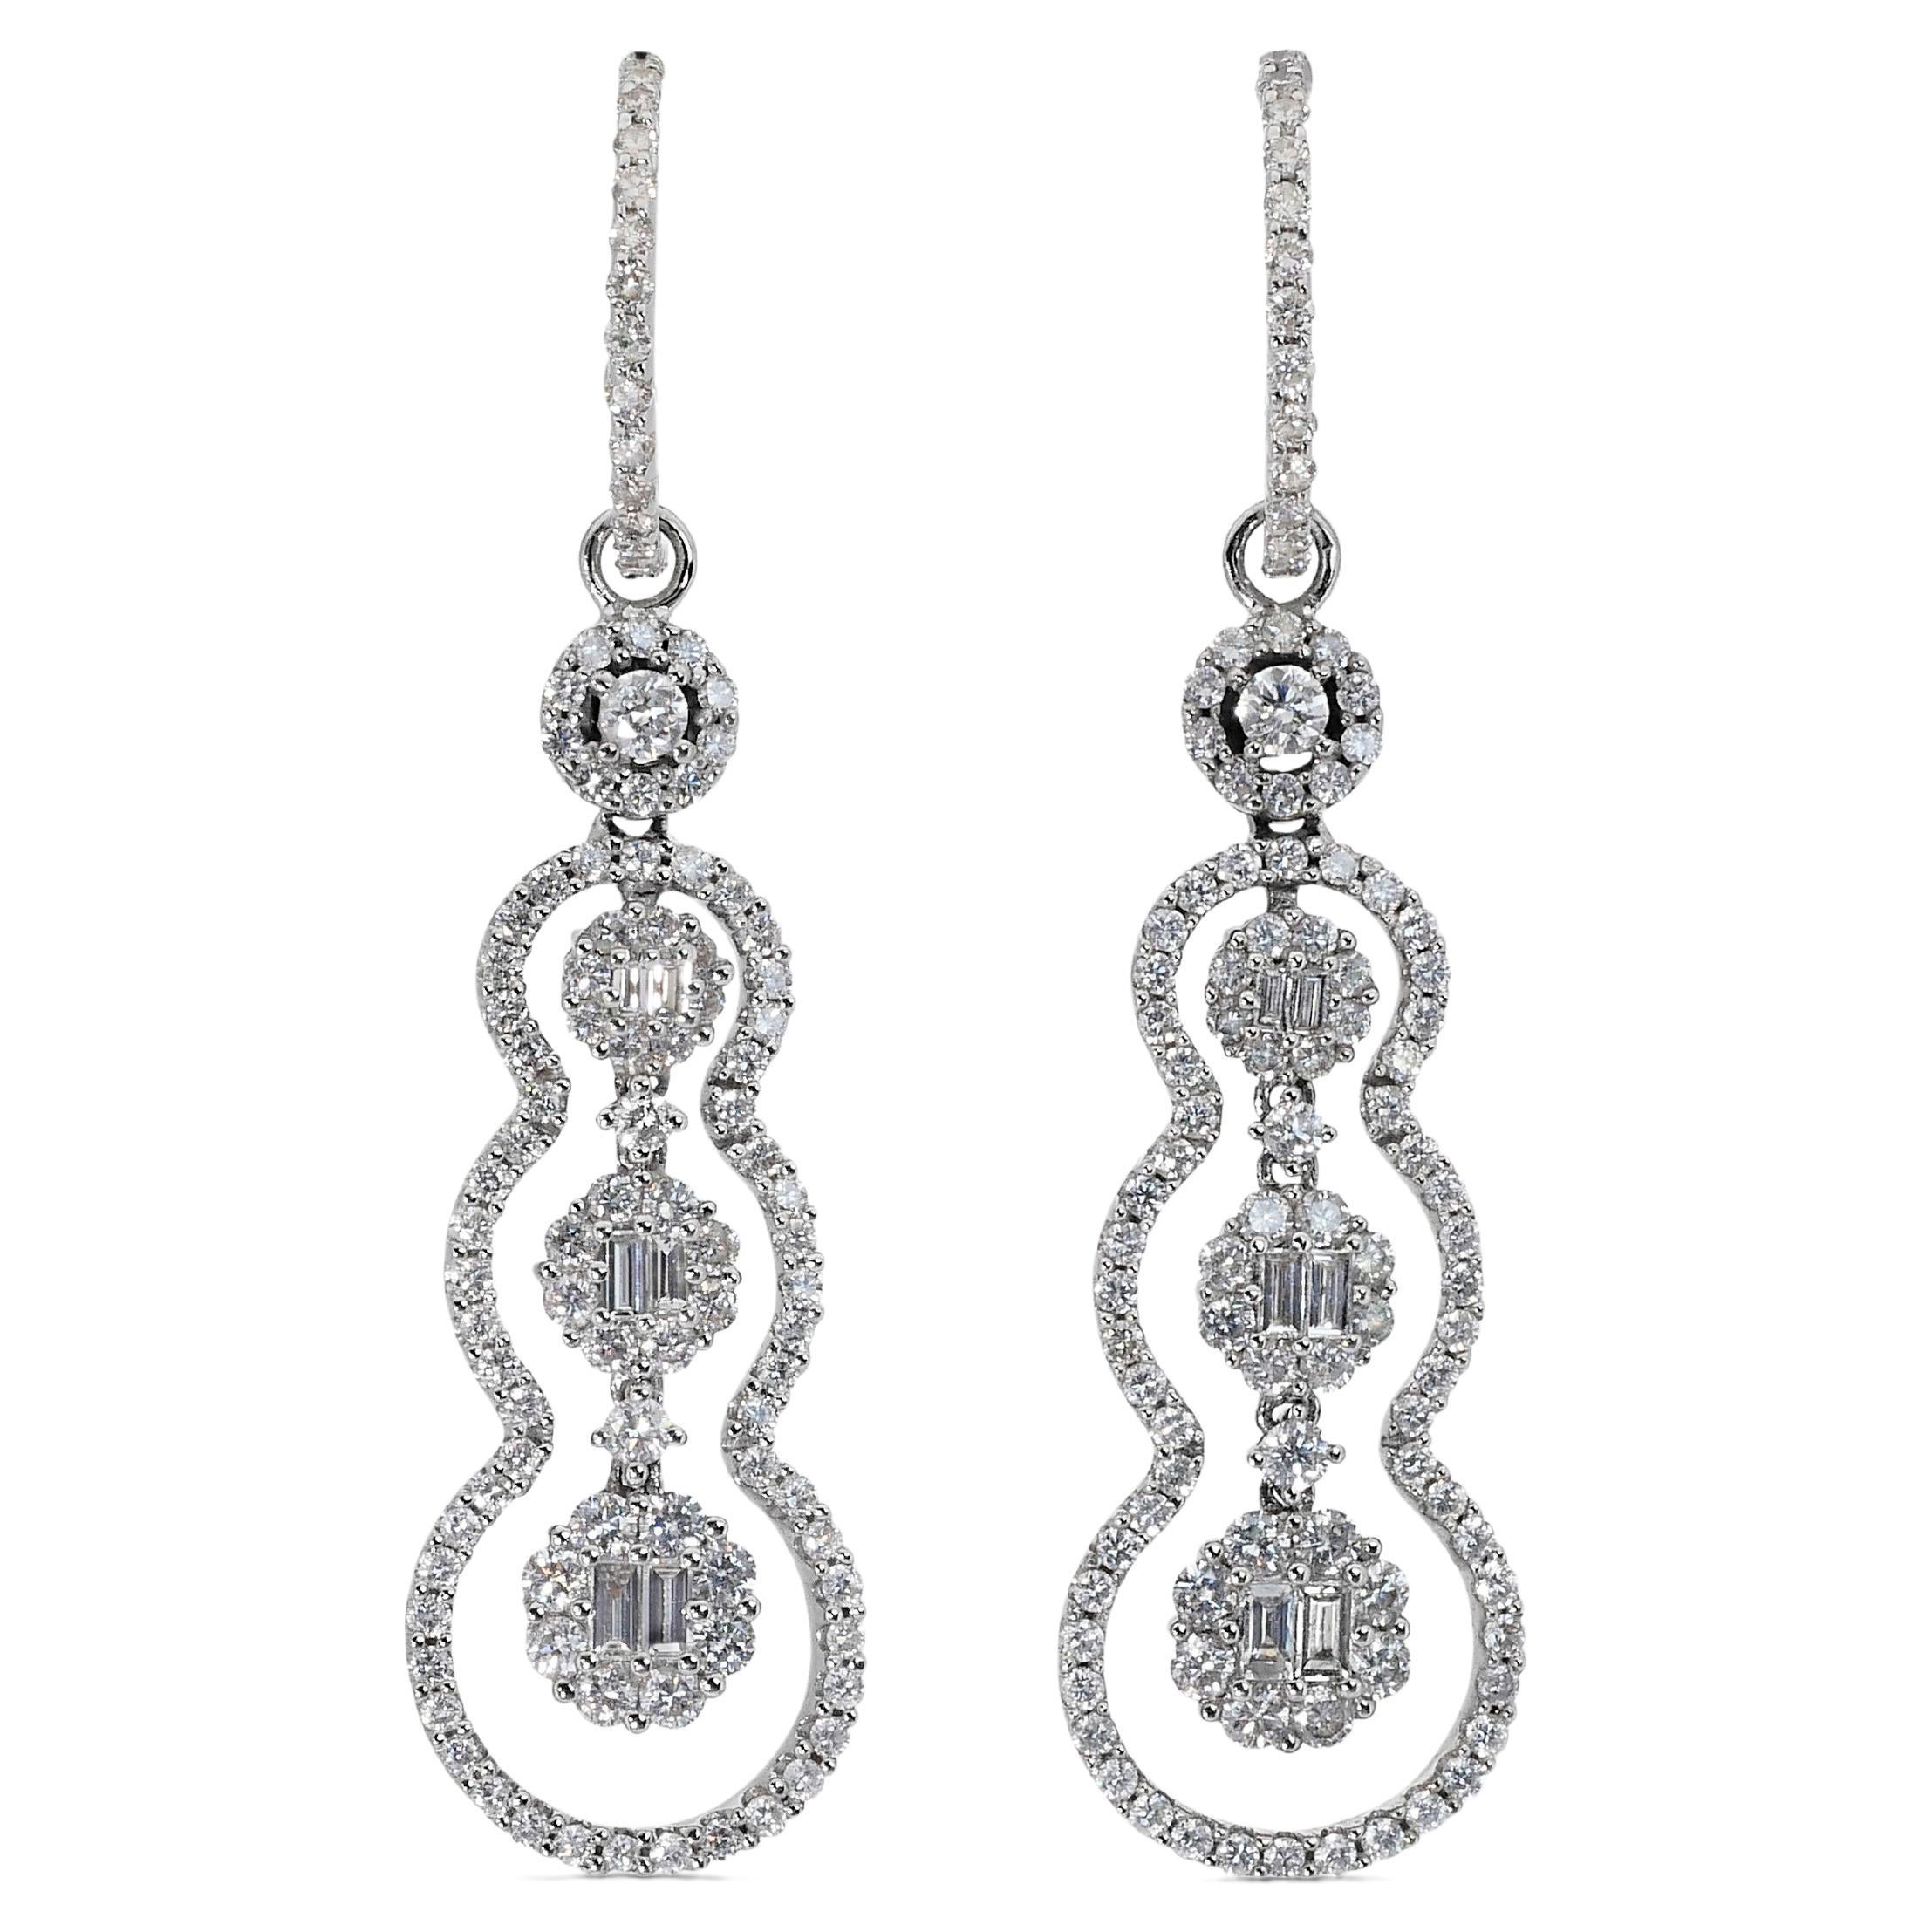 Marvelous 18k White Gold Drop Earrings w/ 3.5ct Natural Diamonds AIG Certificate For Sale